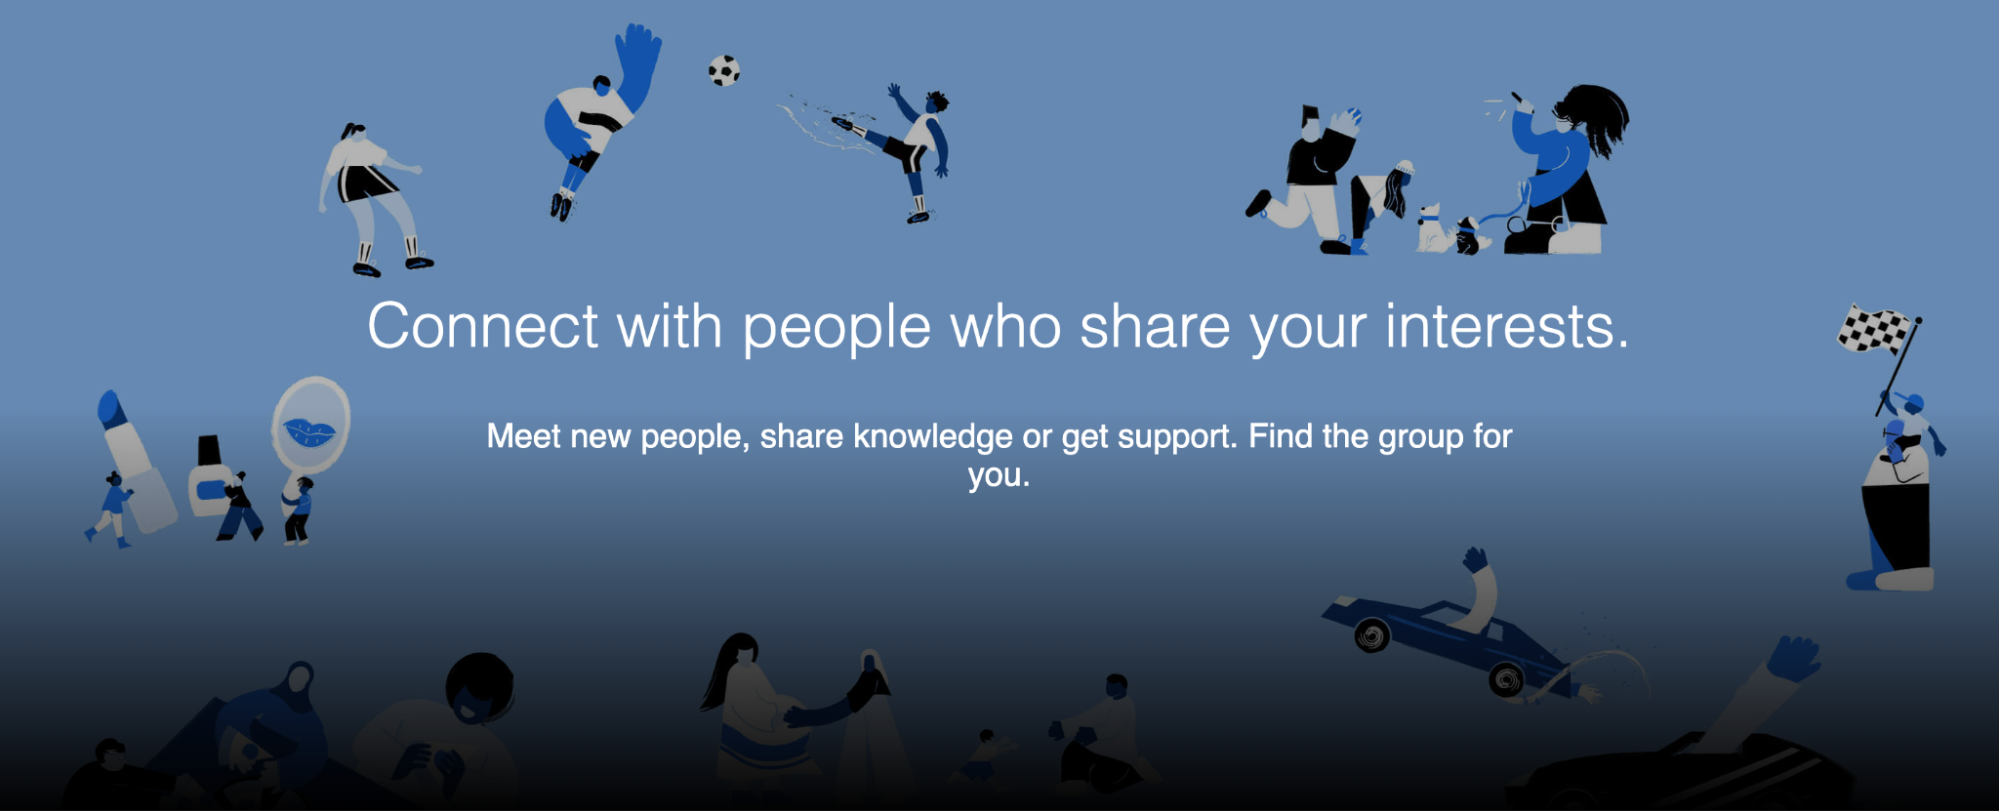 Banner for Facebook Groups with illustrations of people practicing hobbies such as soccer and dog walking.